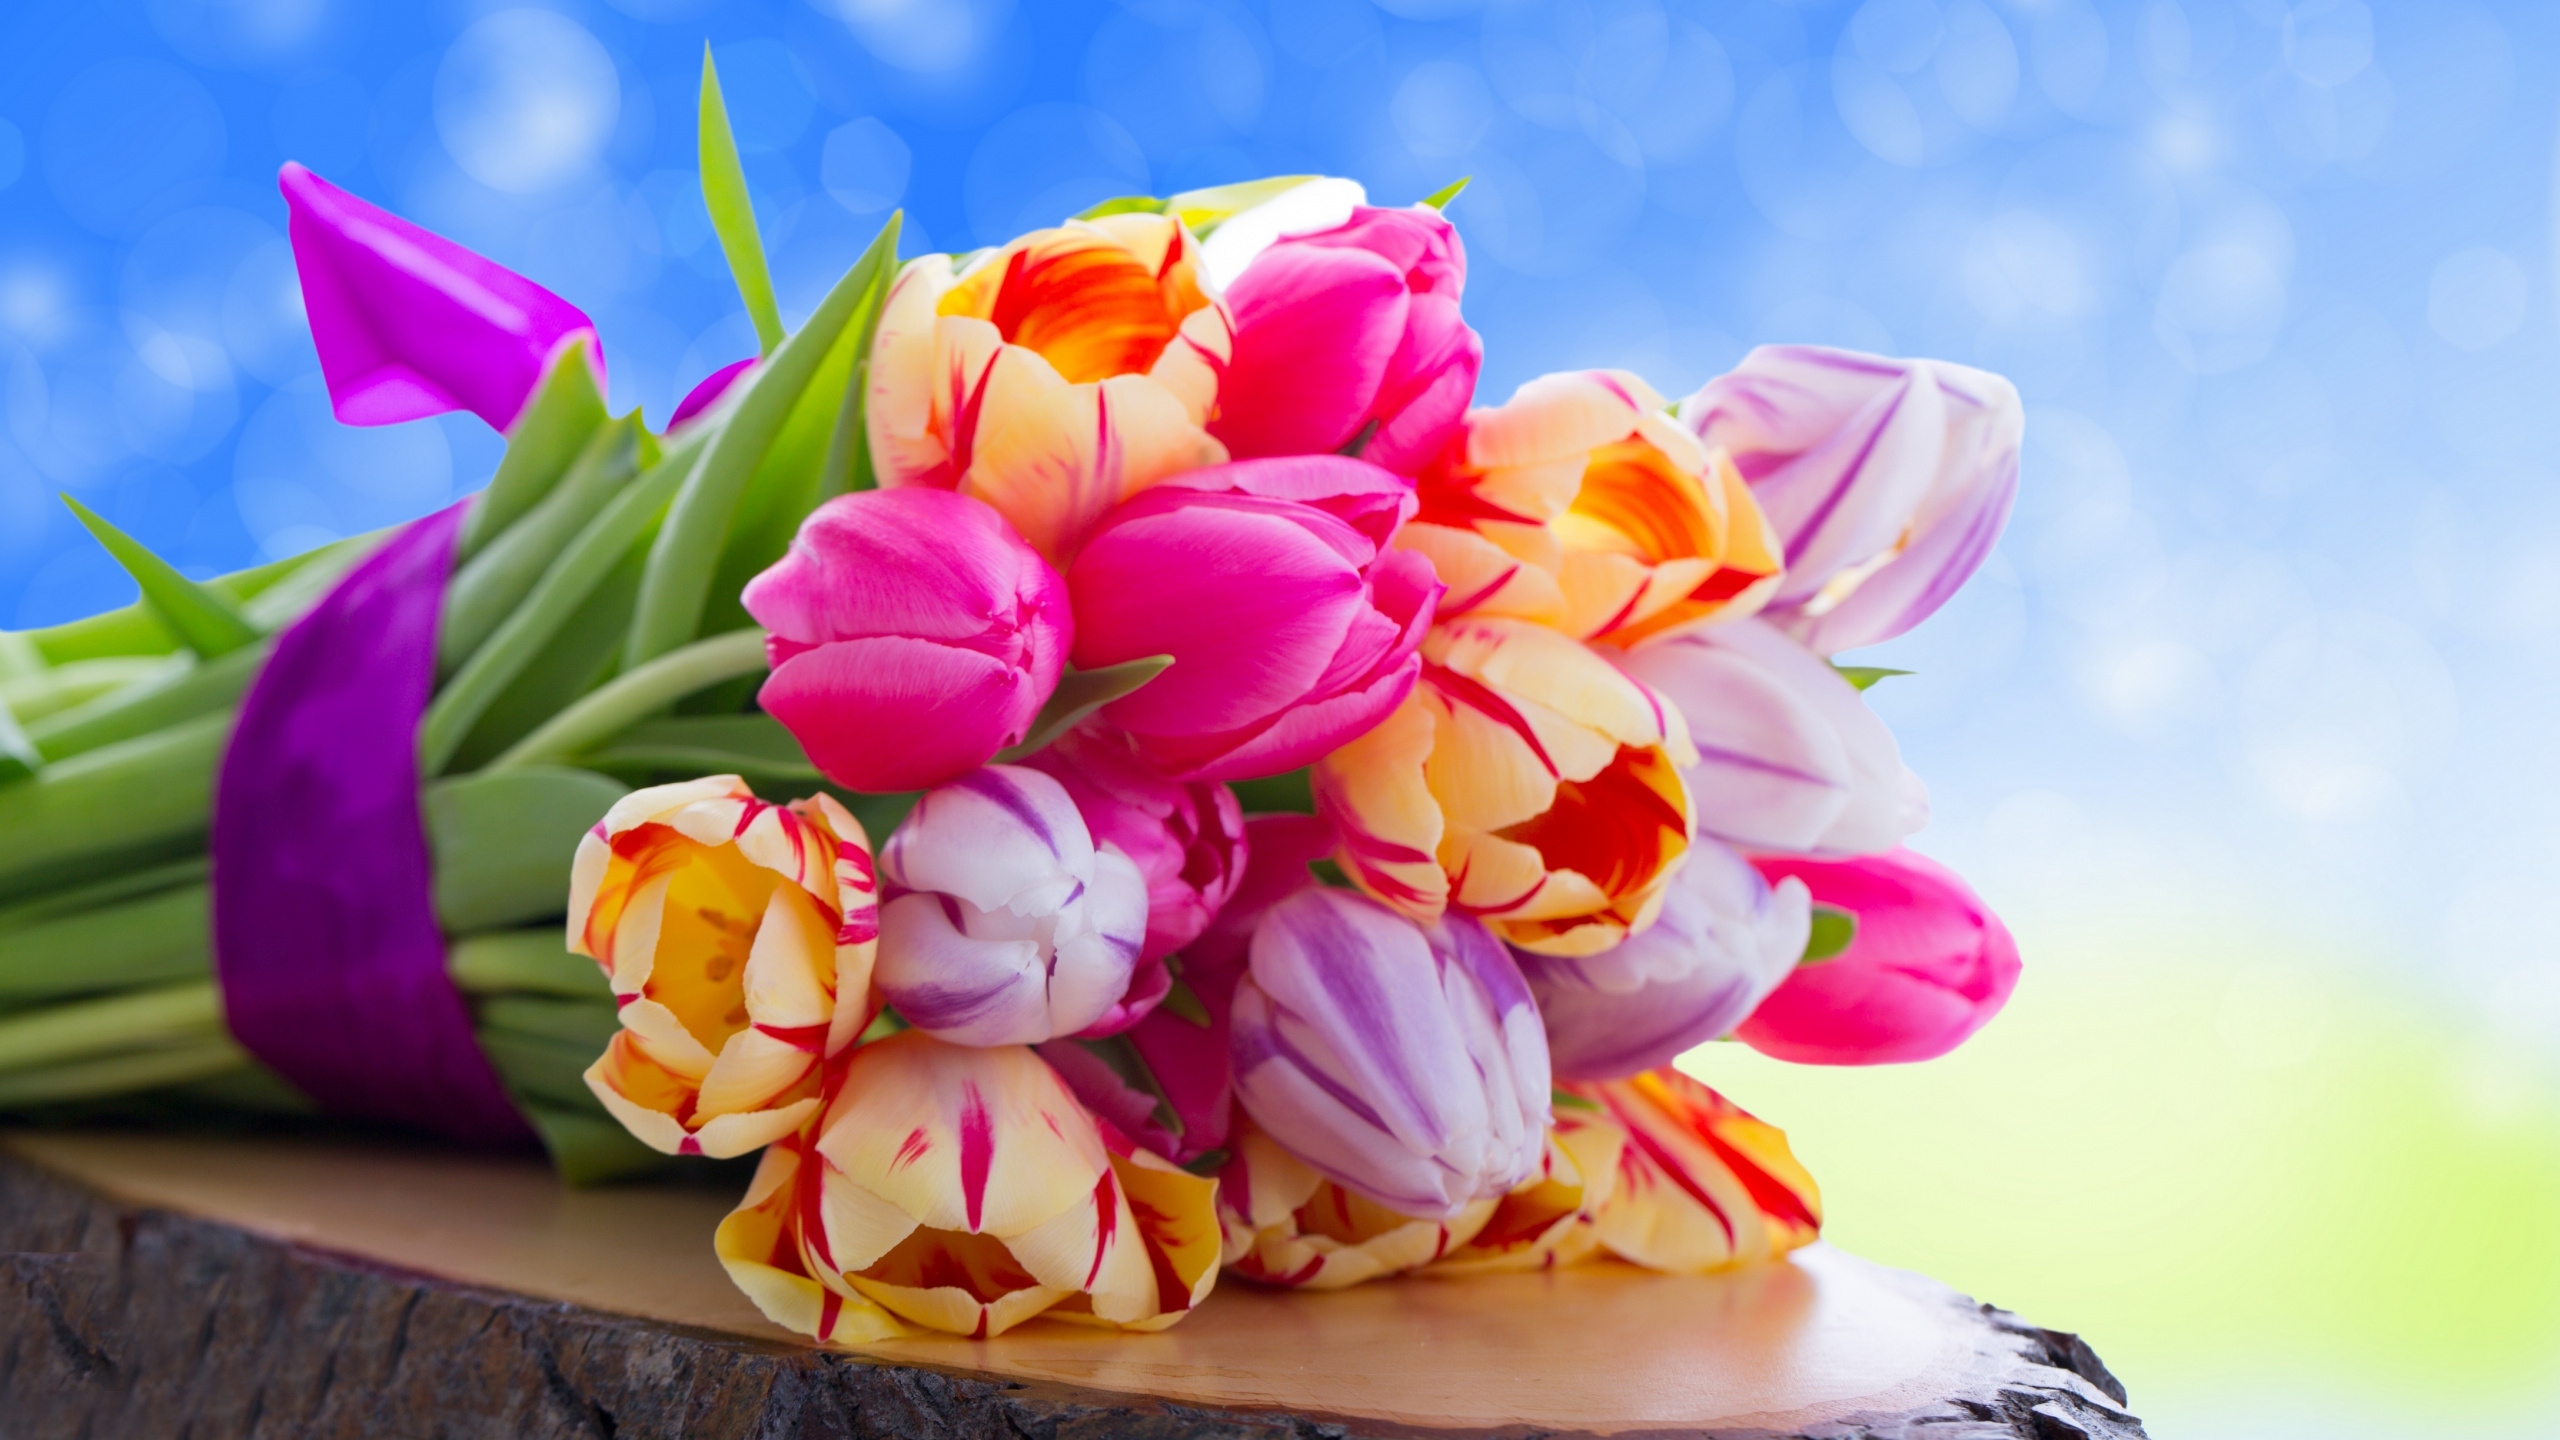 Pink and Yellow Tulips Bouquet. Wallpaper in 2560x1440 Resolution